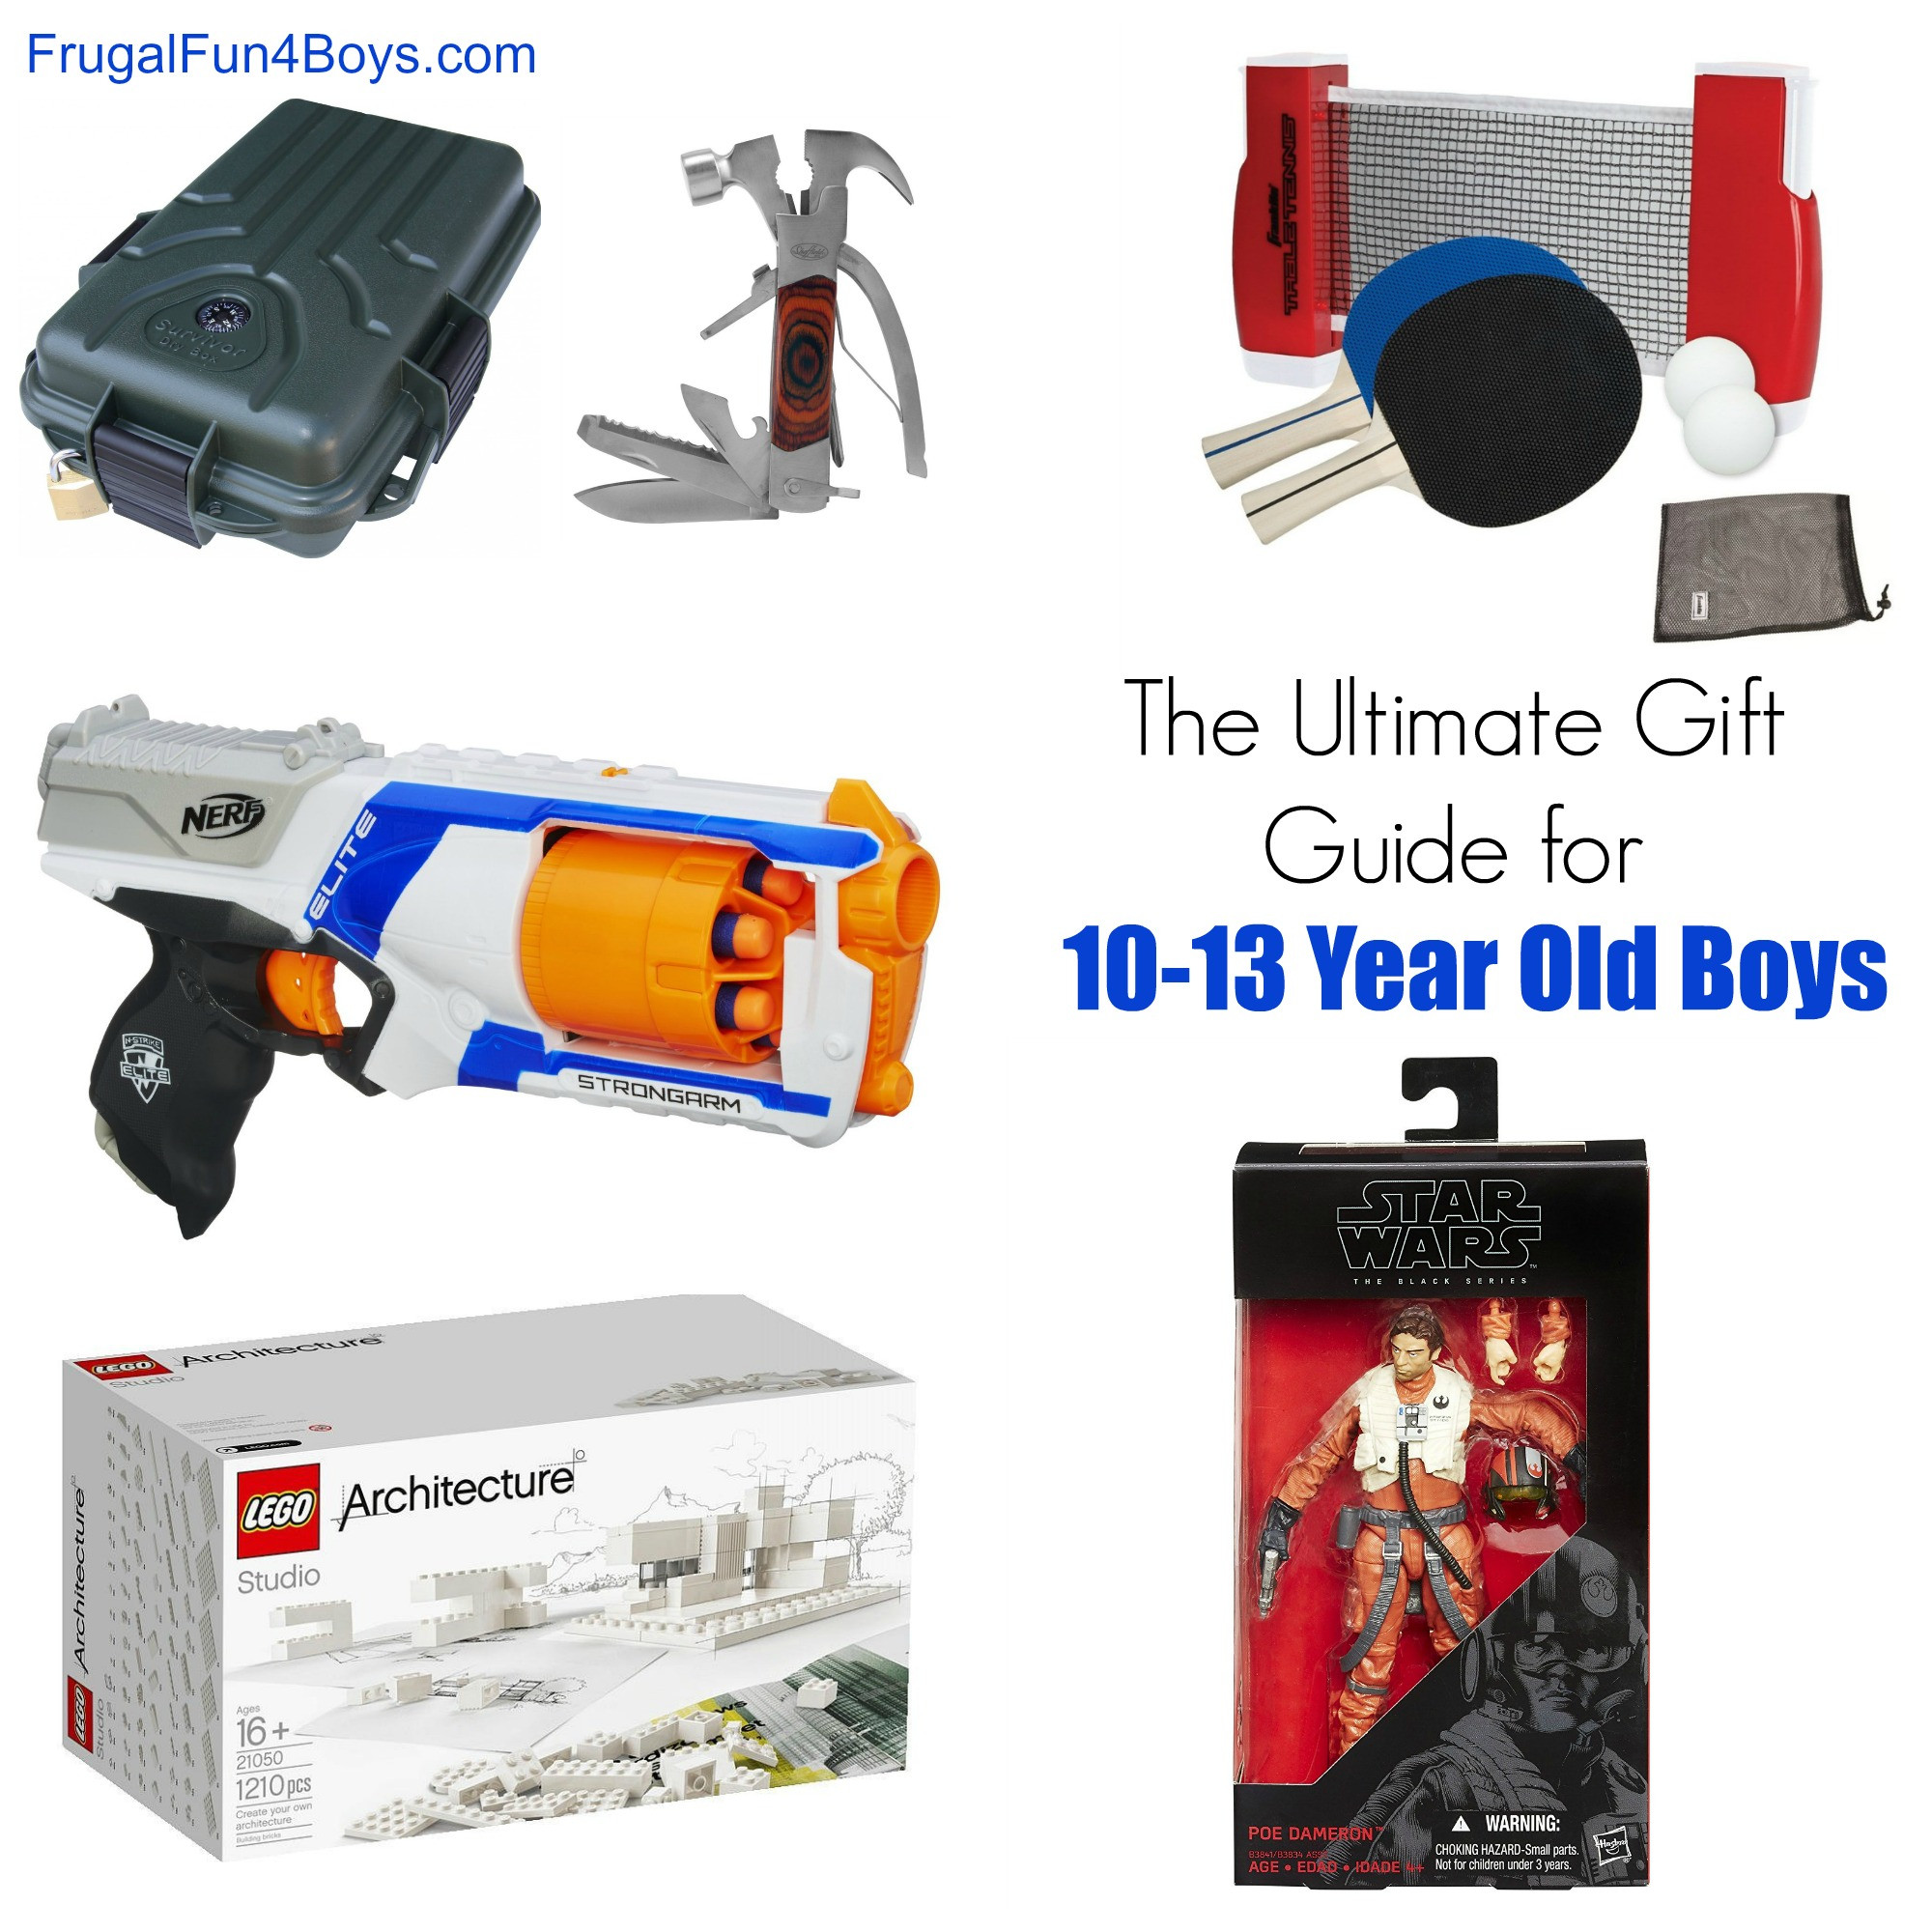 Gift Ideas For Boys Age 10
 Gift Ideas for 10 to 13 Year Old Boys